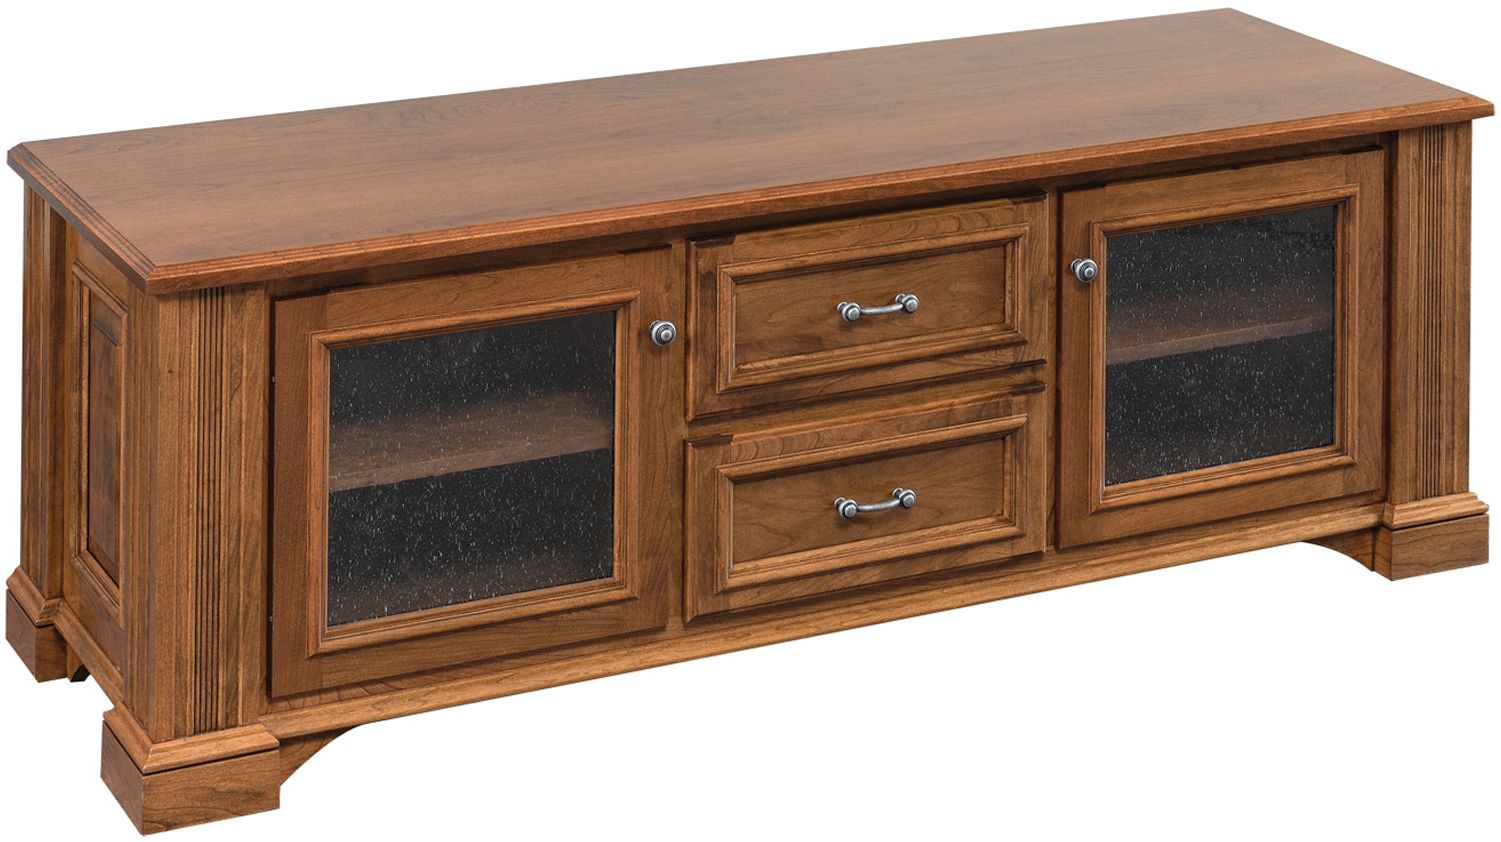 Lincoln Deluxe Plasma Tv Stand | Amish Solid Hardwood Tv Intended For Dillon Tv Stands Oak (View 3 of 20)